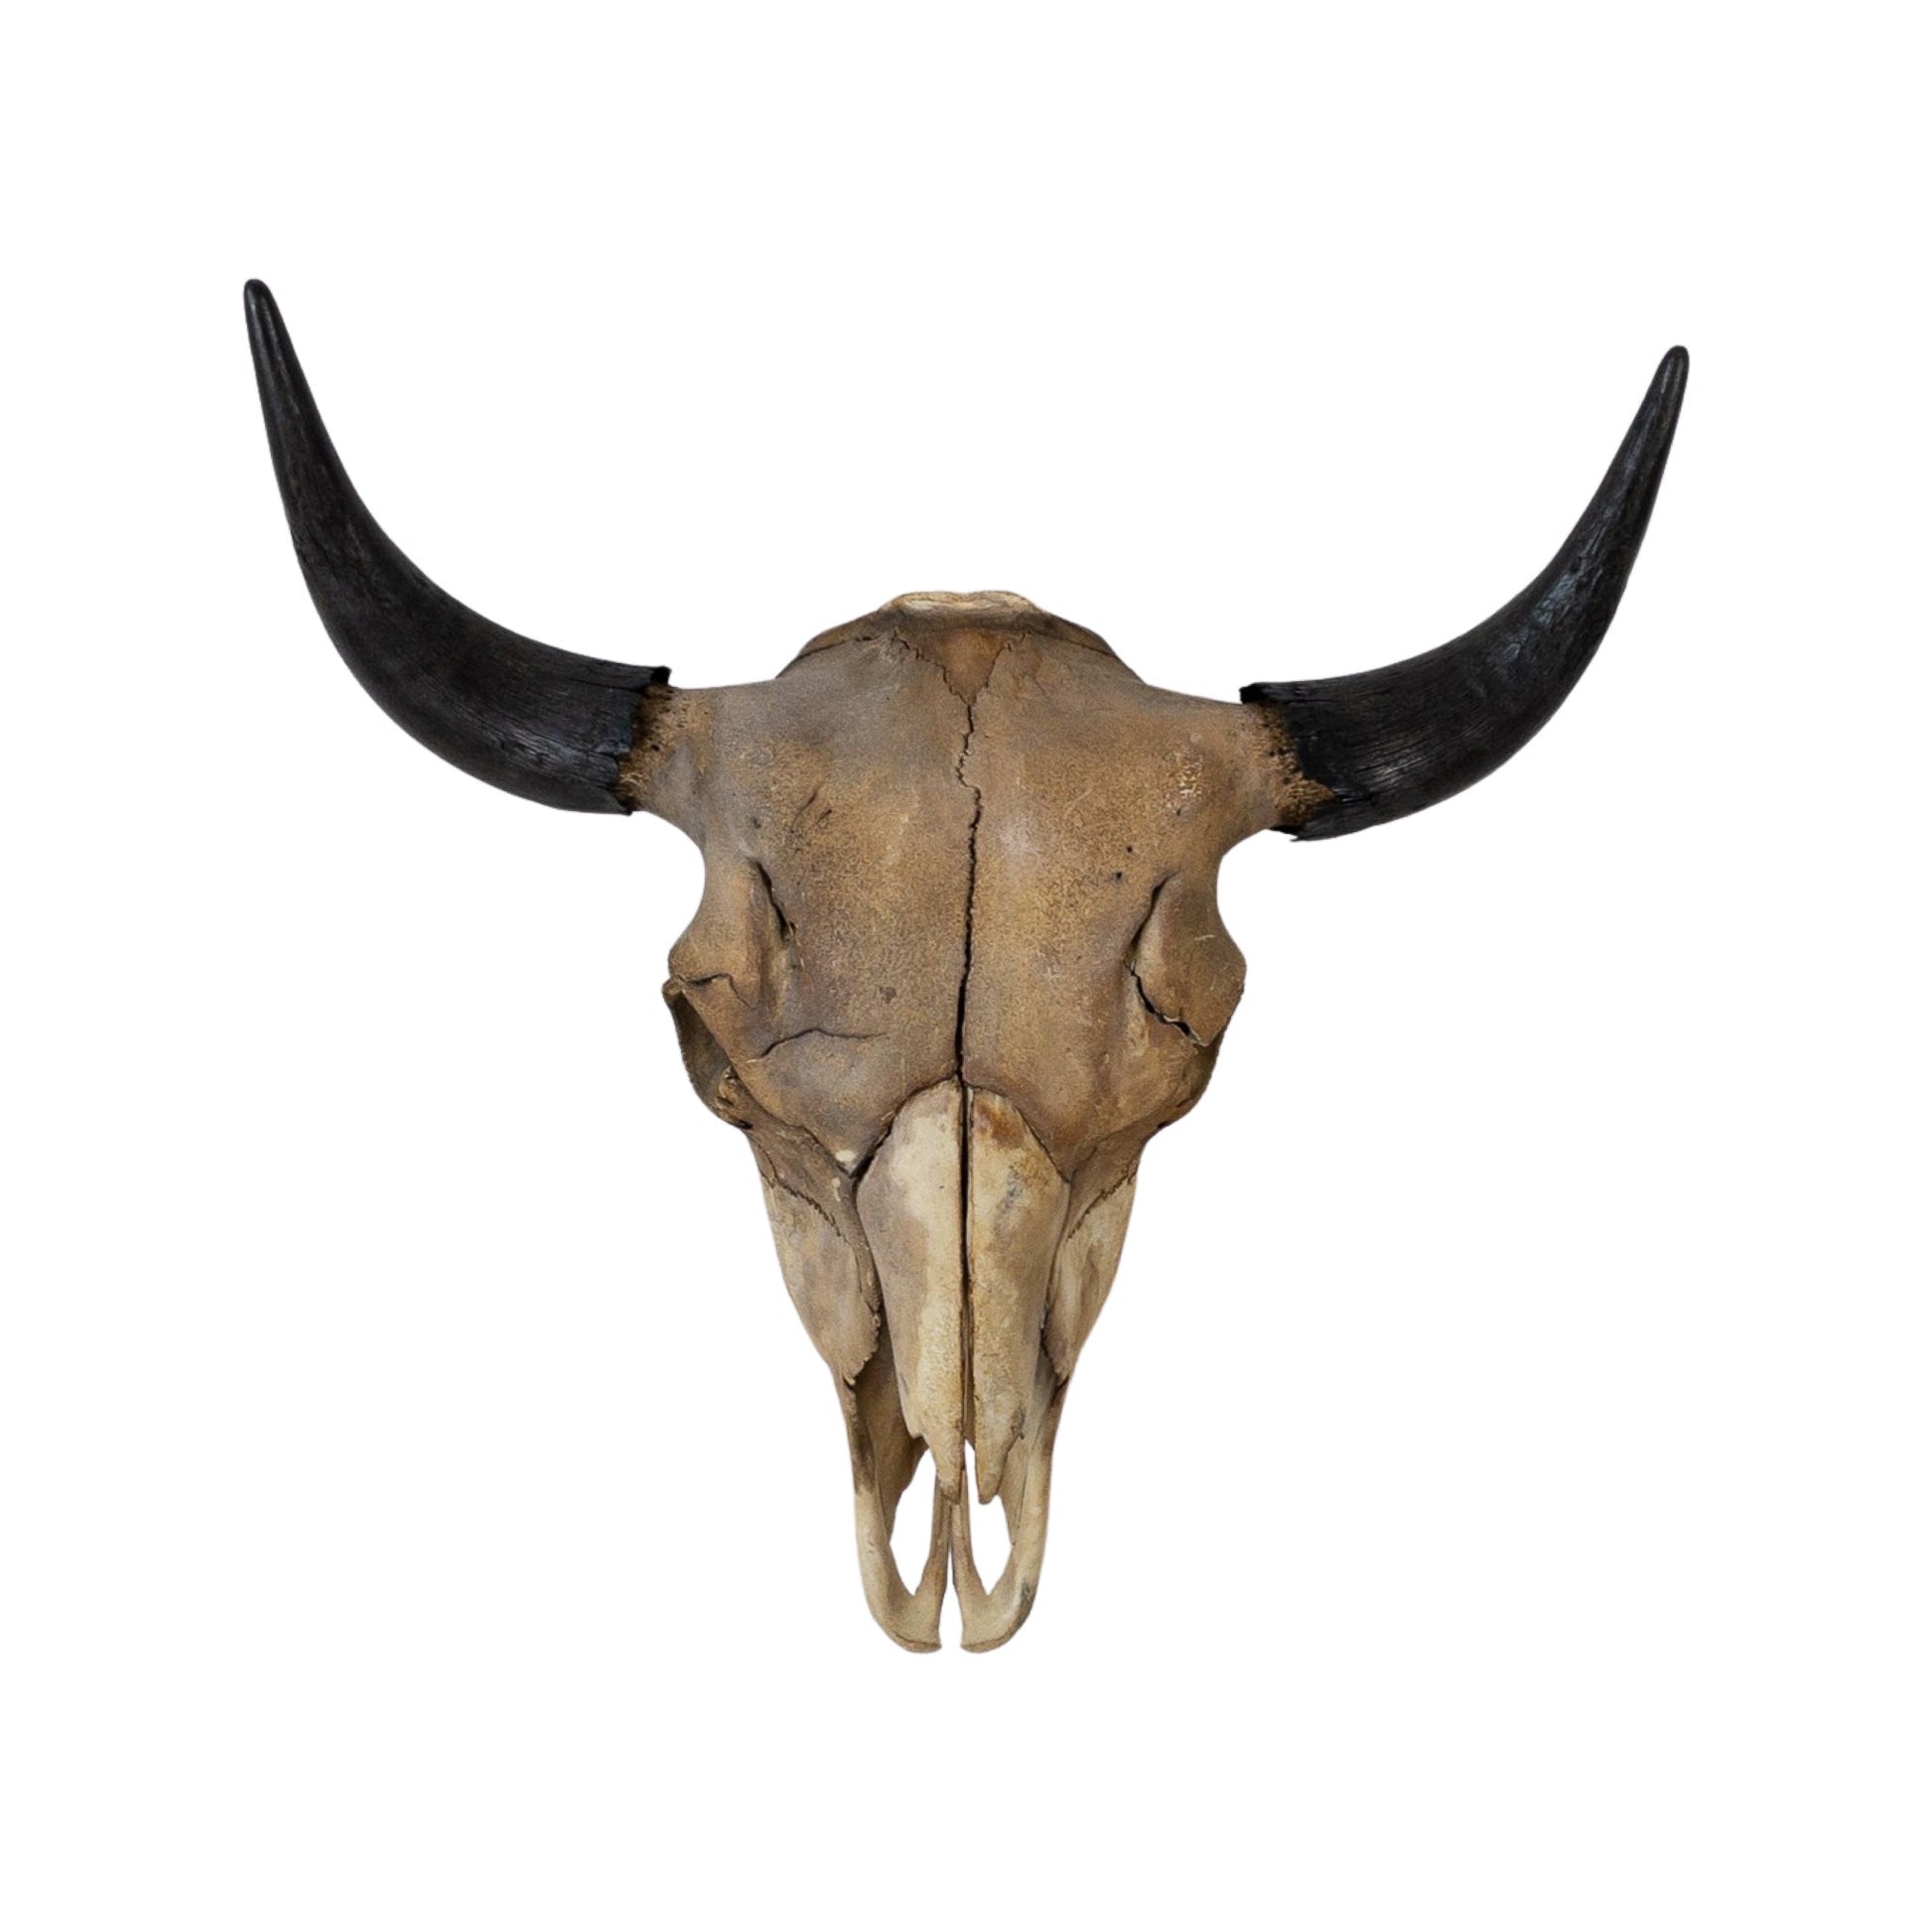 A Home Decor Taxidermy Skull Bison Coffee Stained of Grade Vintage